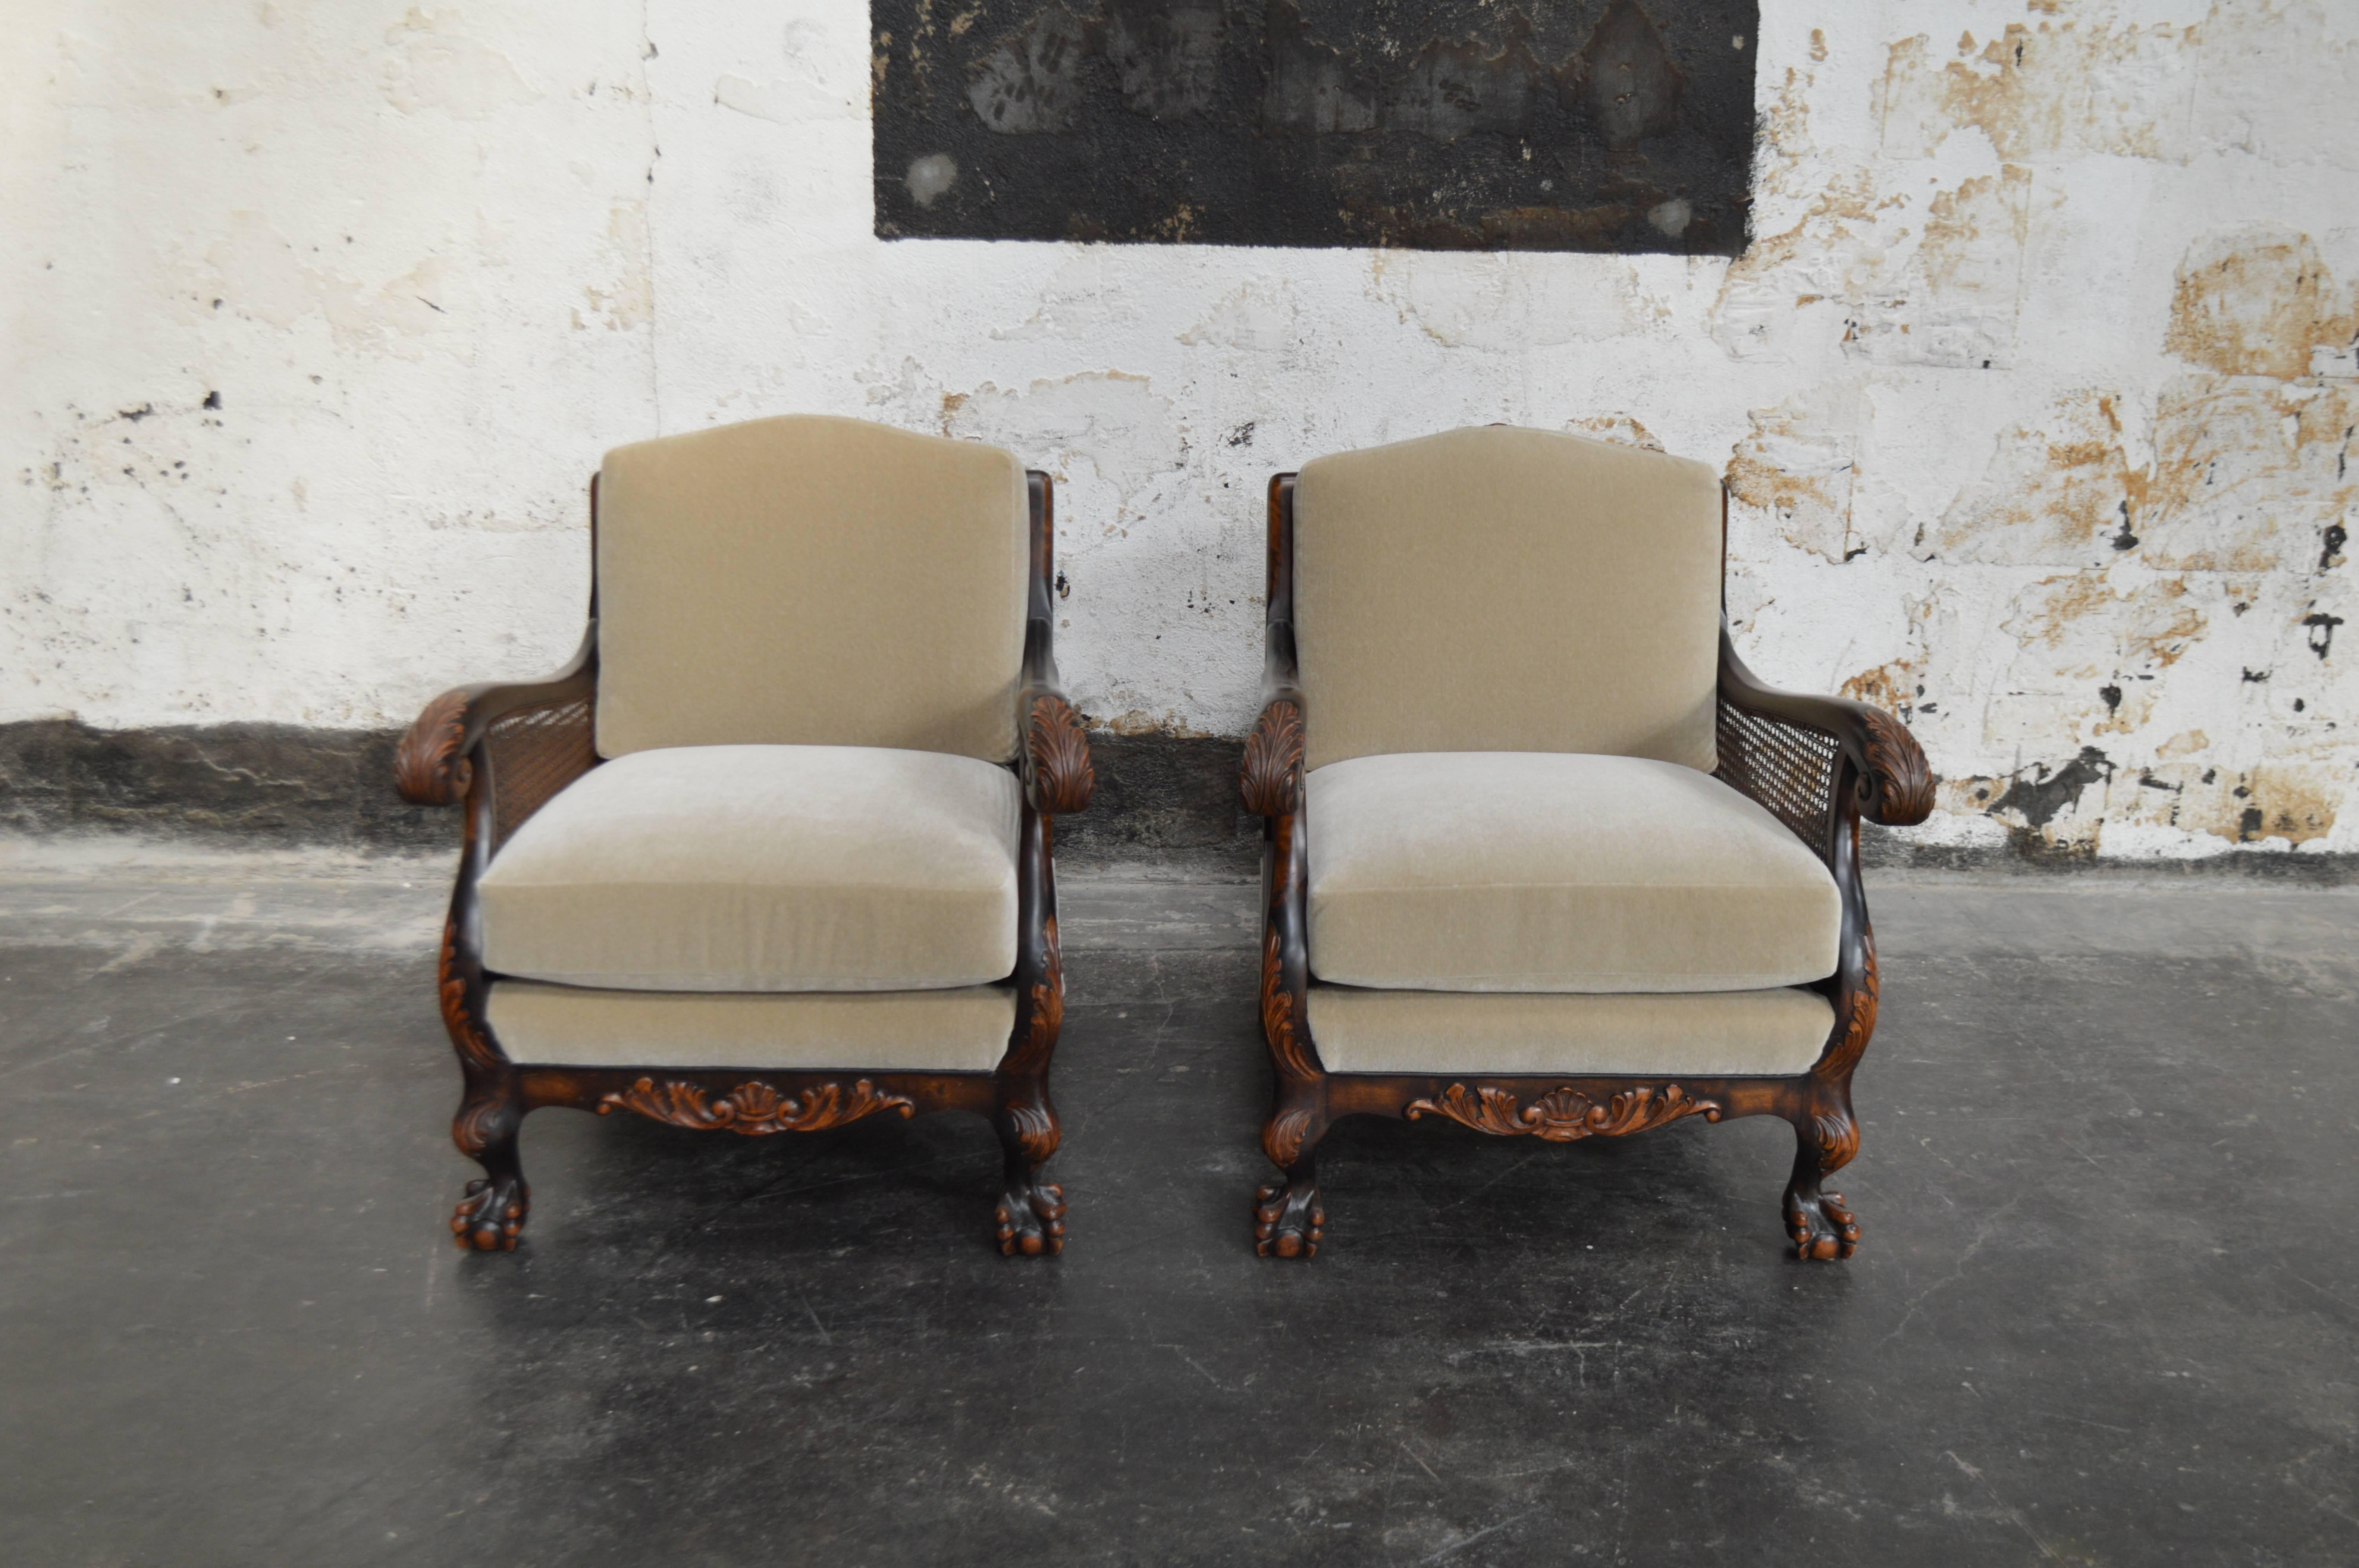 Pair of dark flame birch carved armchairs newly upholstered in beige mohair. Features caned back and arms and exposed carved wood that has a handsomely aged patina. Cushions have eight-way hand-tied springs and new recycled foam.

Fabric swatch